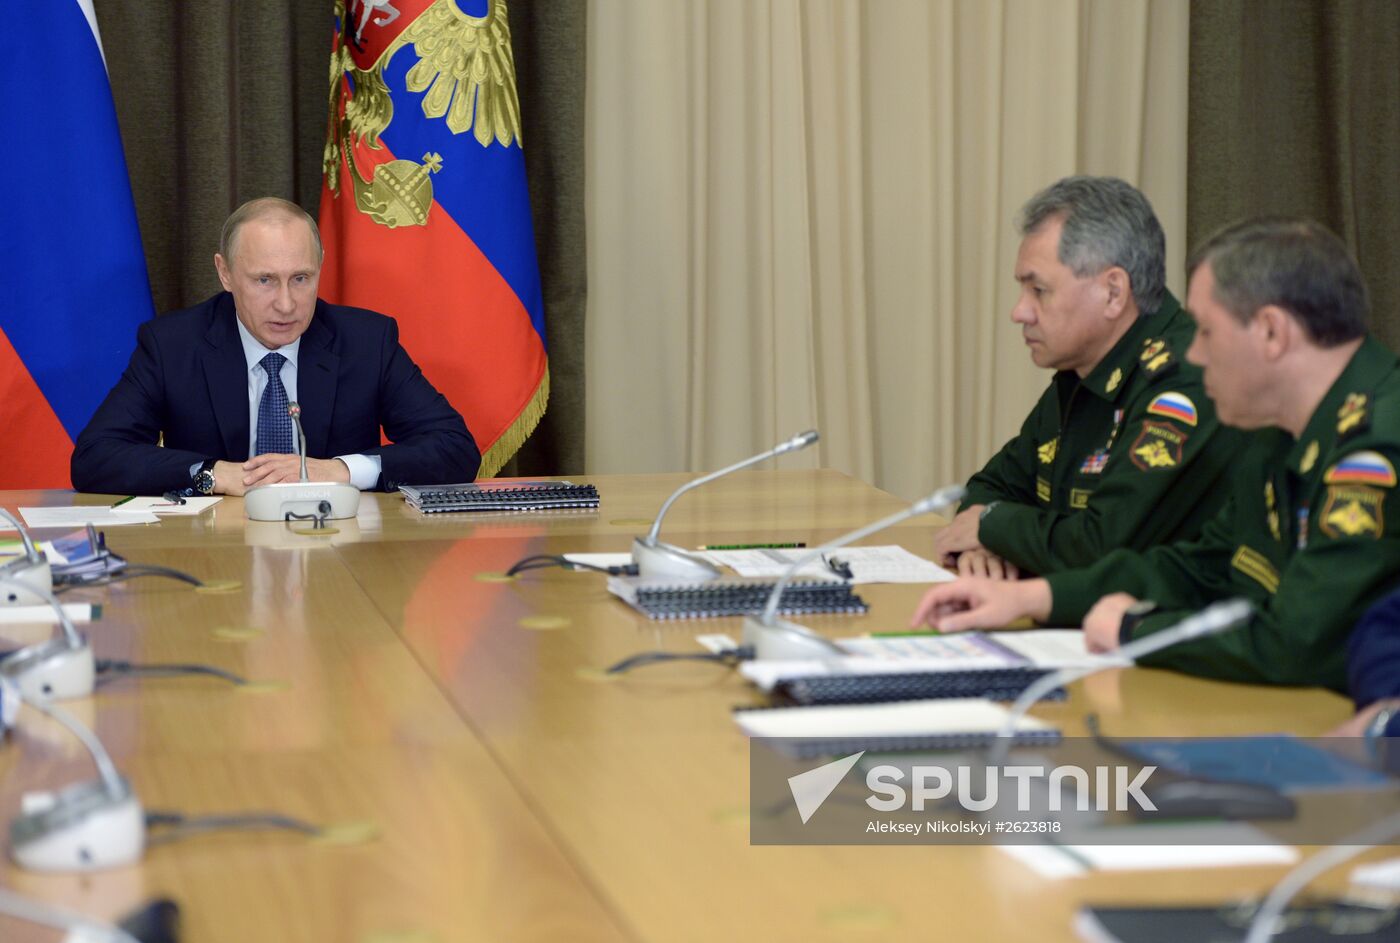 Russian President Vladimir Putin chairs meeting with senior Defense Ministry officials and defense-industry representatives